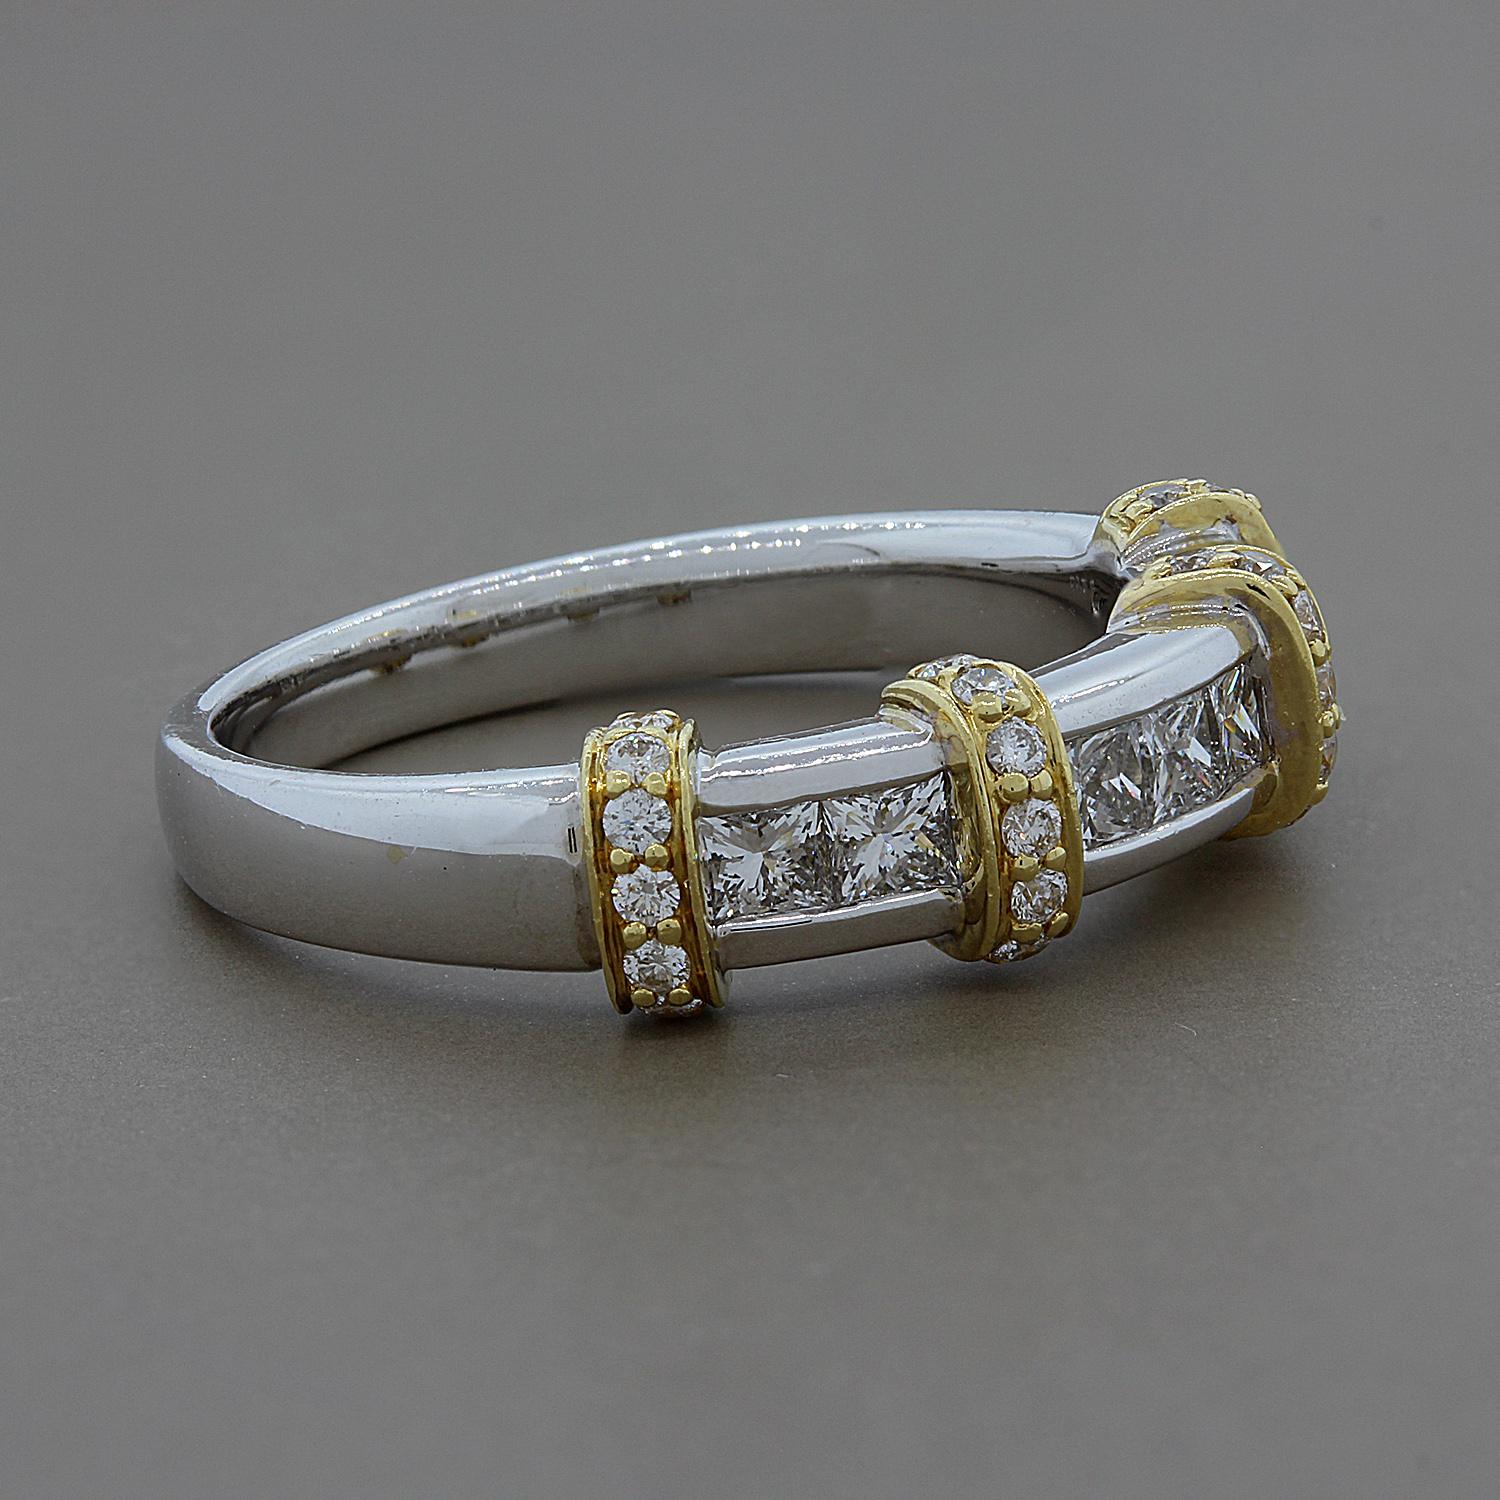 Modernity meets glam with 0.72 carats of princess cut and round cut diamonds. This unique two-tone band of 18K white gold features fun 18K yellow gold accents runs. A beautiful ring to add to your collection.

Currently ring size 7
